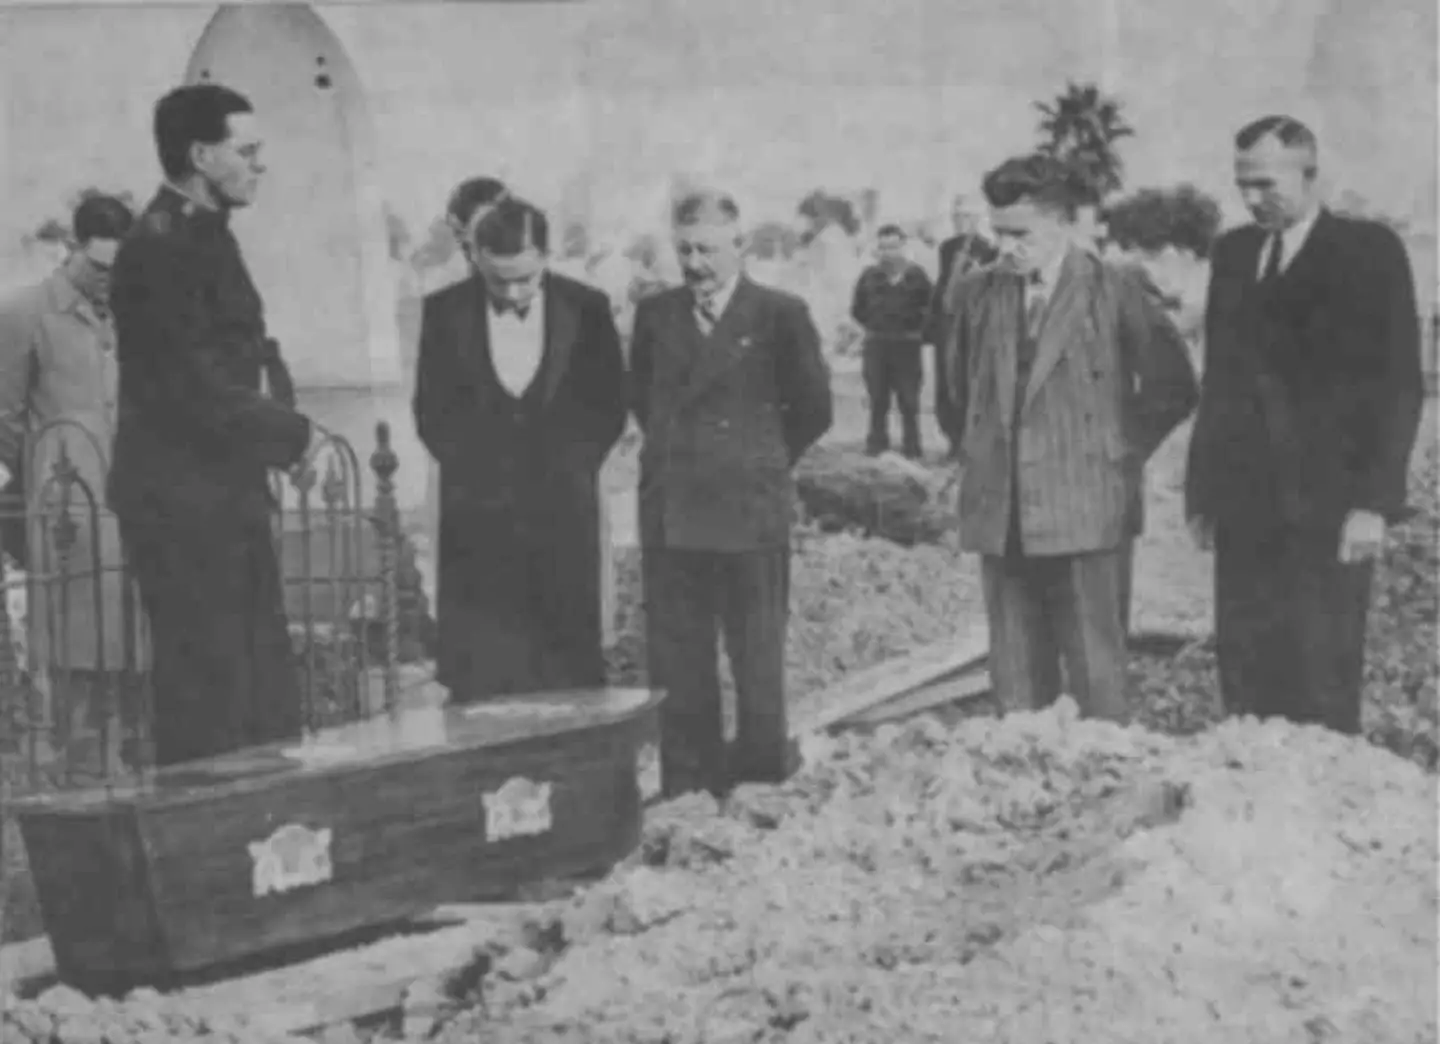 The mystery man was buried with a tombstone reading "Here lies the unknown man who was found at Somerton Beach".